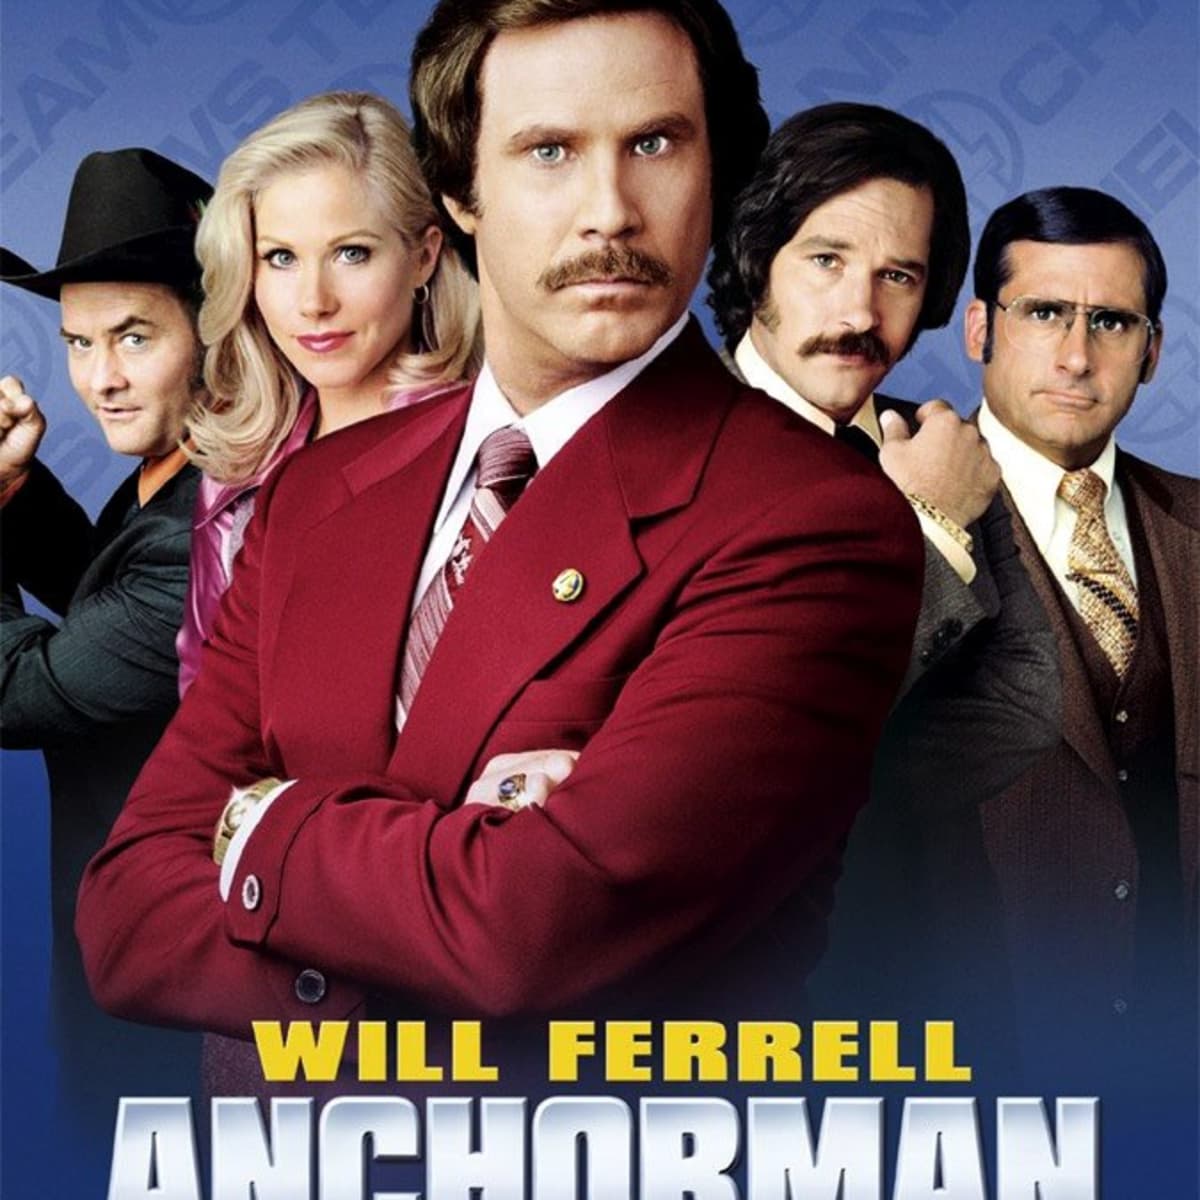 Jack Black wants to make another film with his Anchorman co-star Will  Ferrell